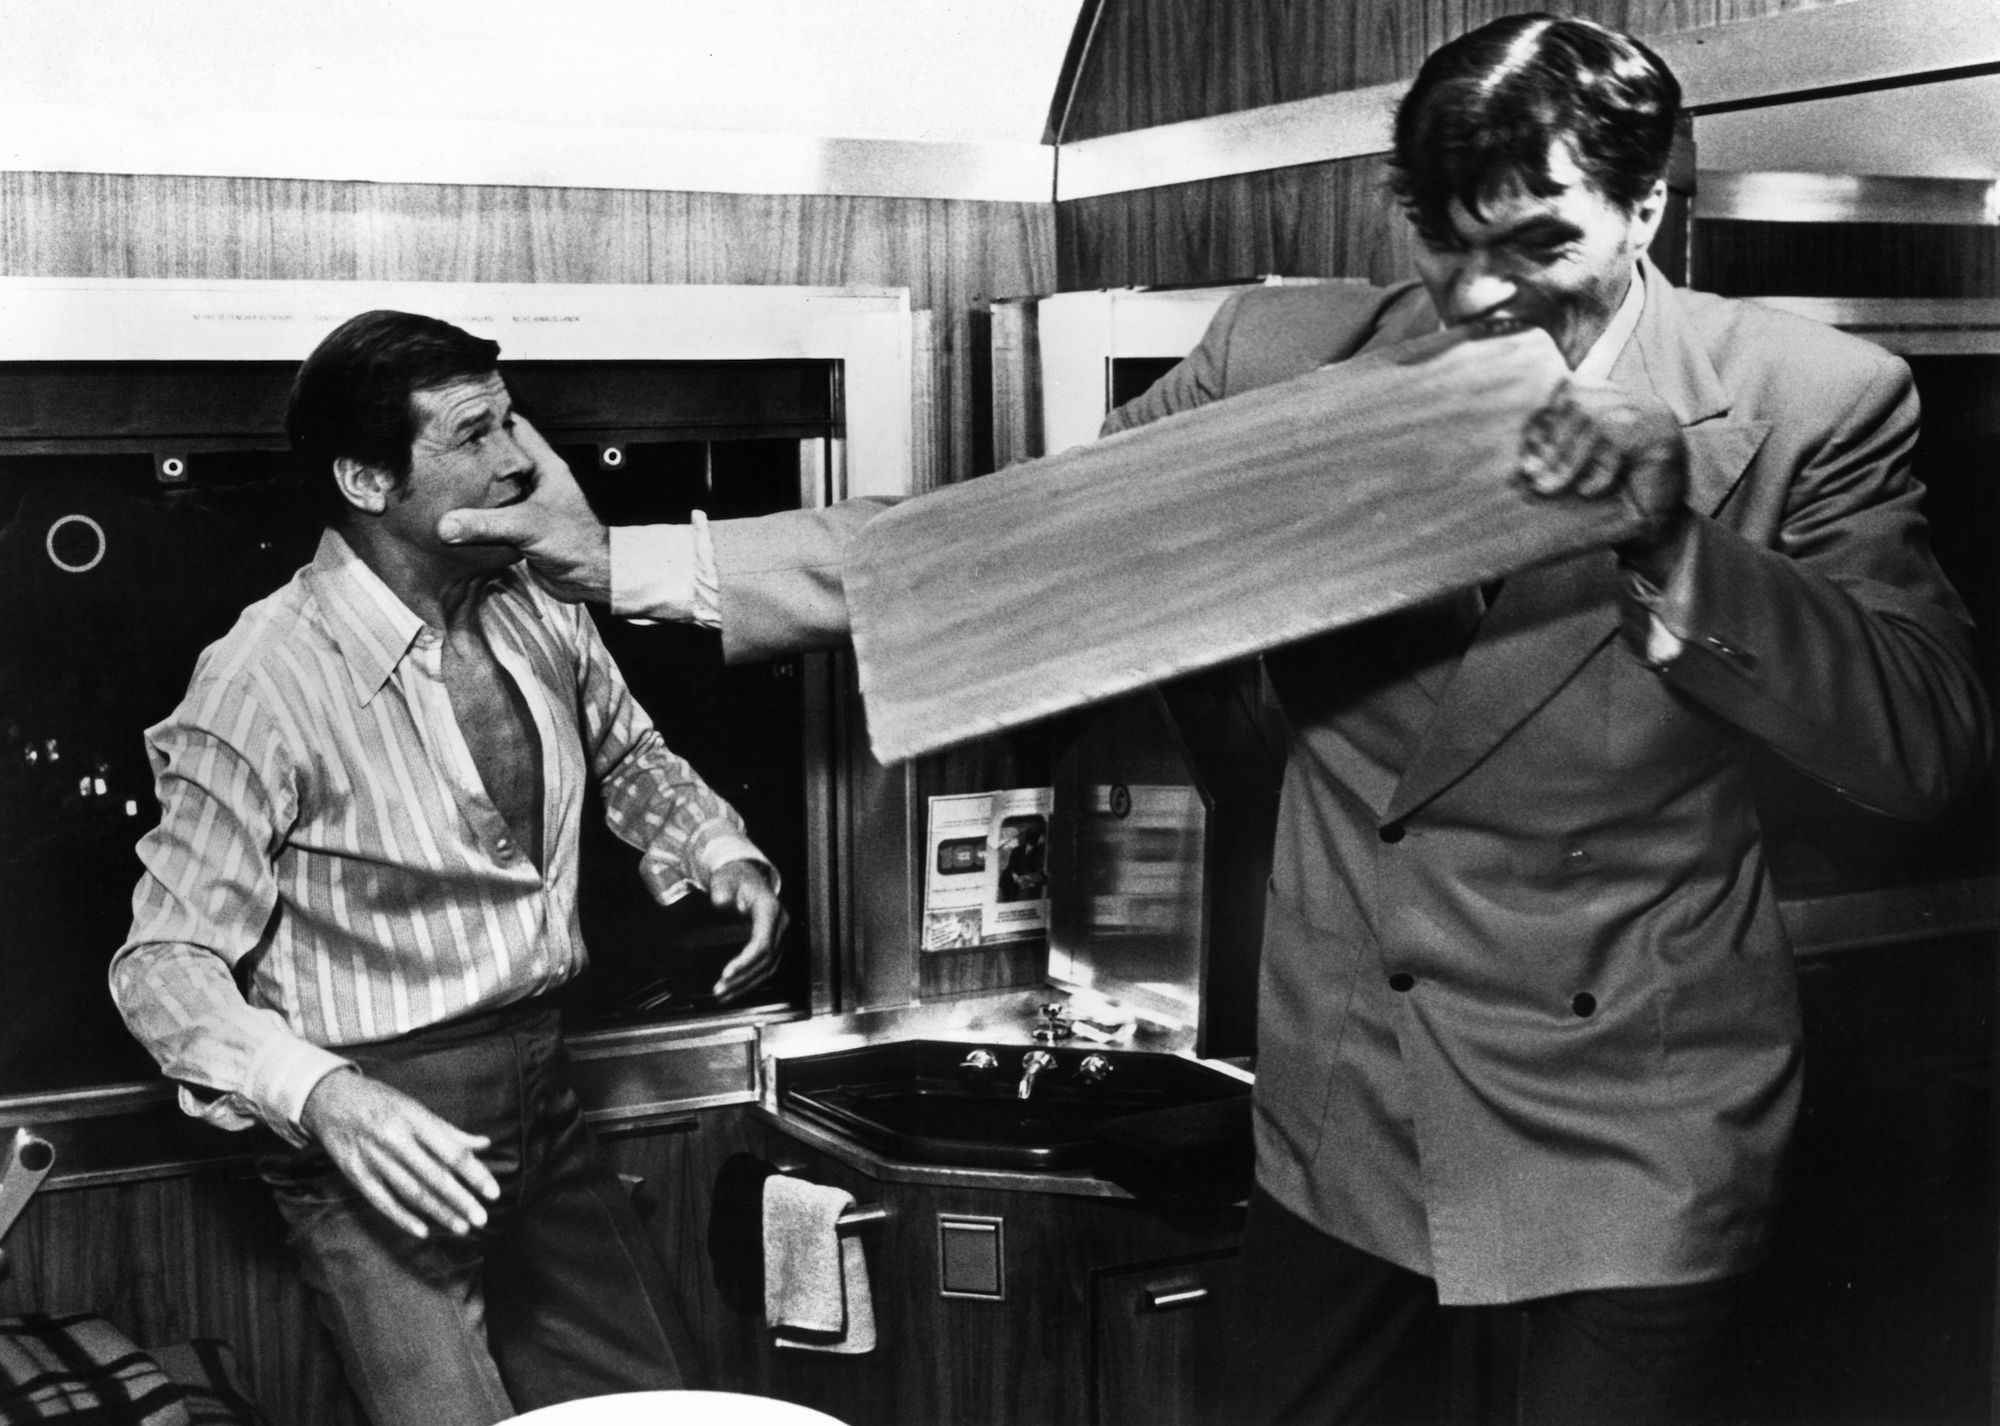 roger moore fights with richard kiel, as jaws, who bites through a board in a scene from the film 'the spy who loved me', 1977 photo by united artistgetty images